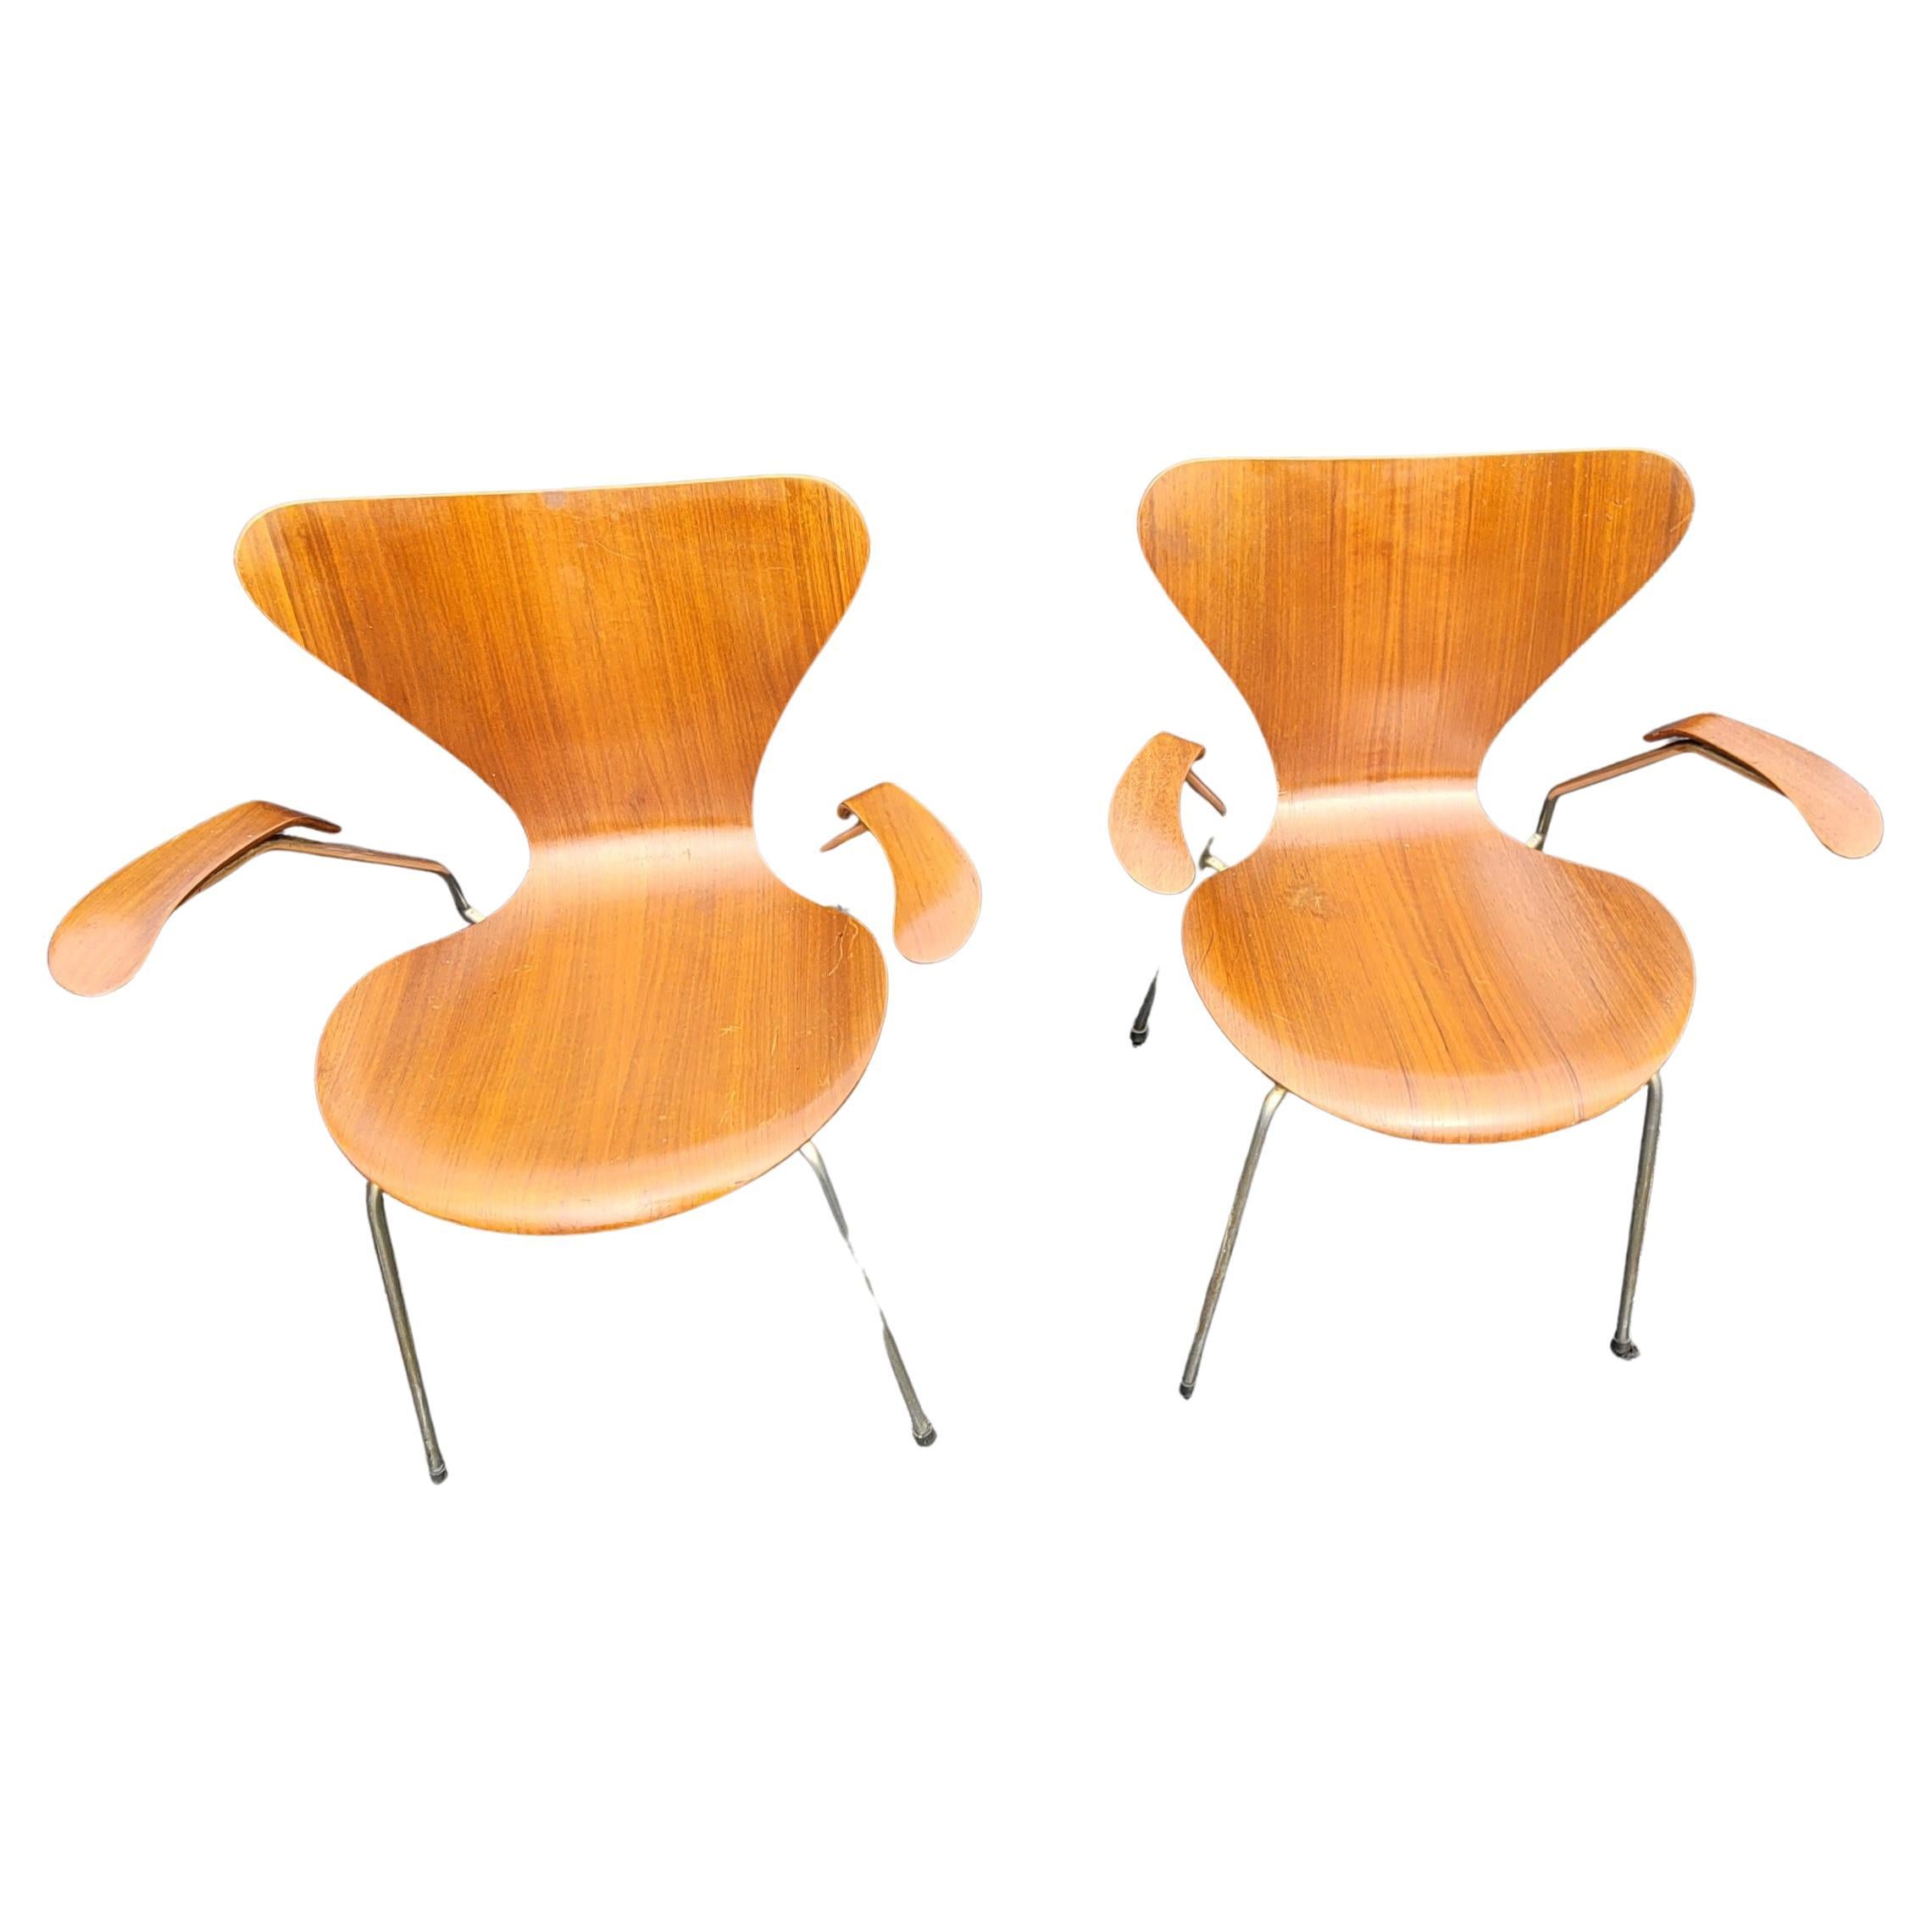 Pair of 'Ant' chairs designed by Arne Jacobsen (1902-1971) in 1952 and produced in Denmark by Fritz Hansen during the 1960s (early 1960s). These are made of molded teak ply on the four-legged nickel-plated steel base. Measures: Arm height is 25.5